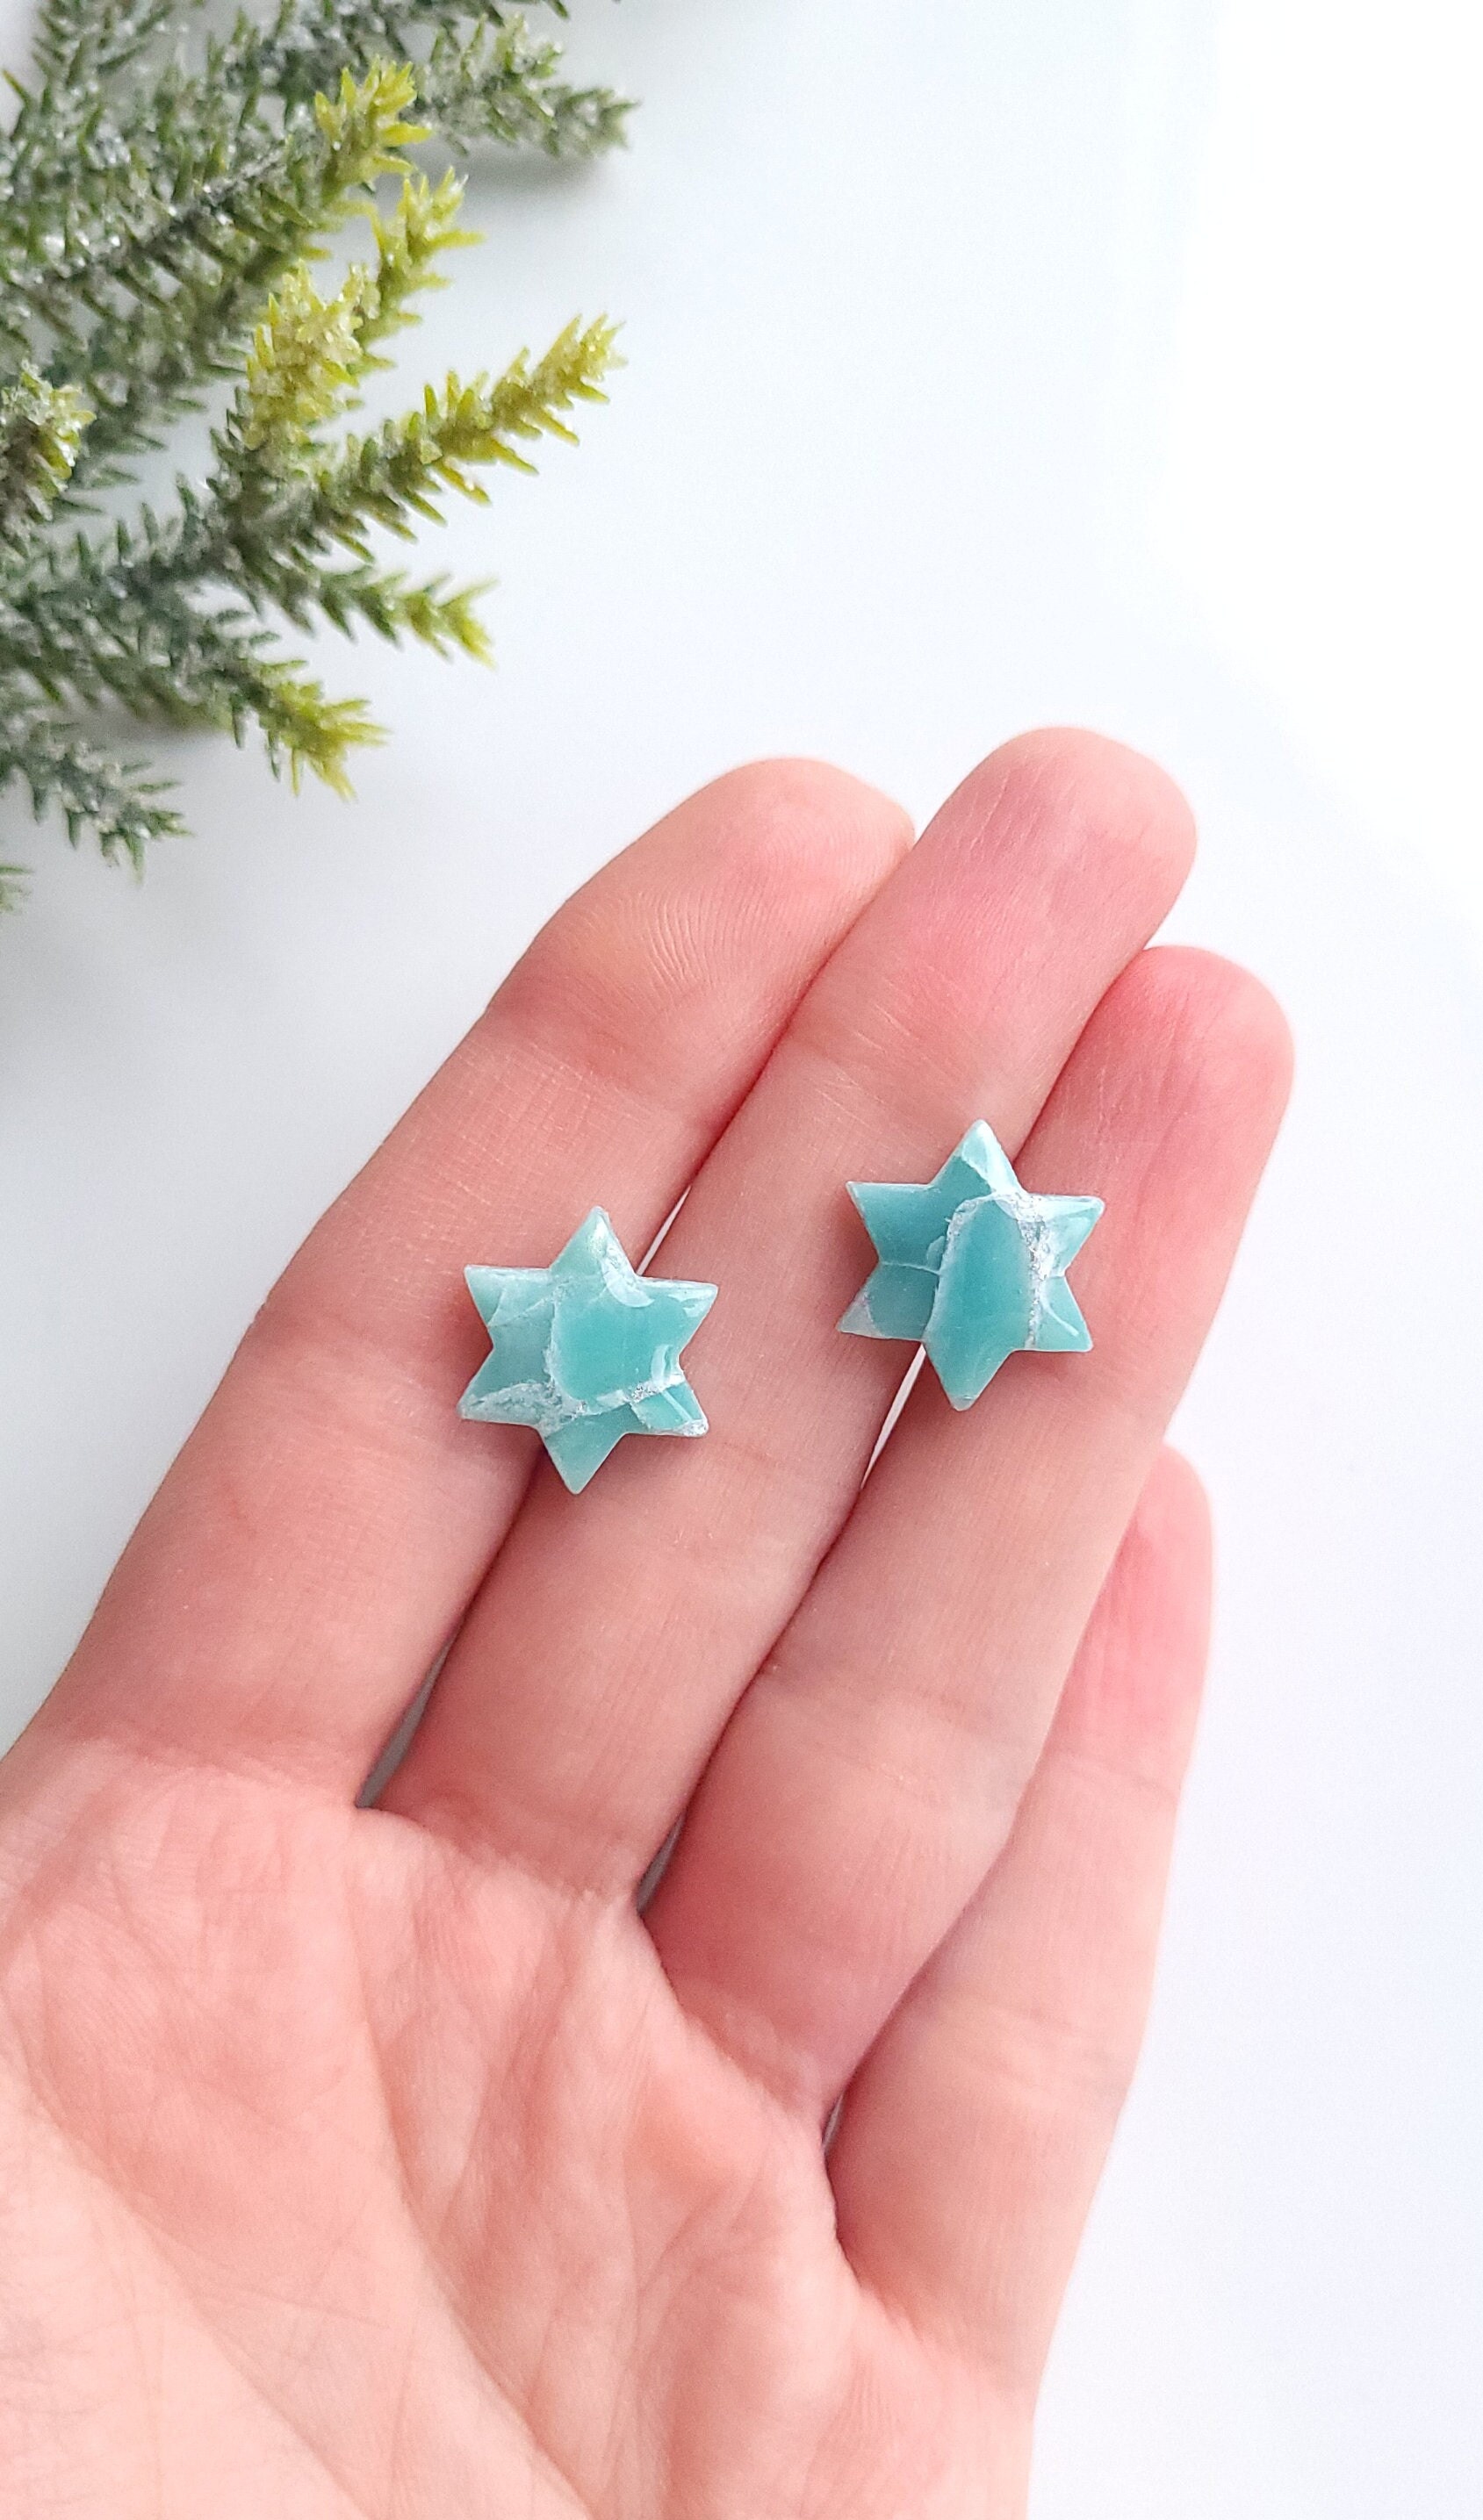 Light Blue Turquoise & Silver Marble Earrings | Handmade Polymer Clay Statement Star Stud